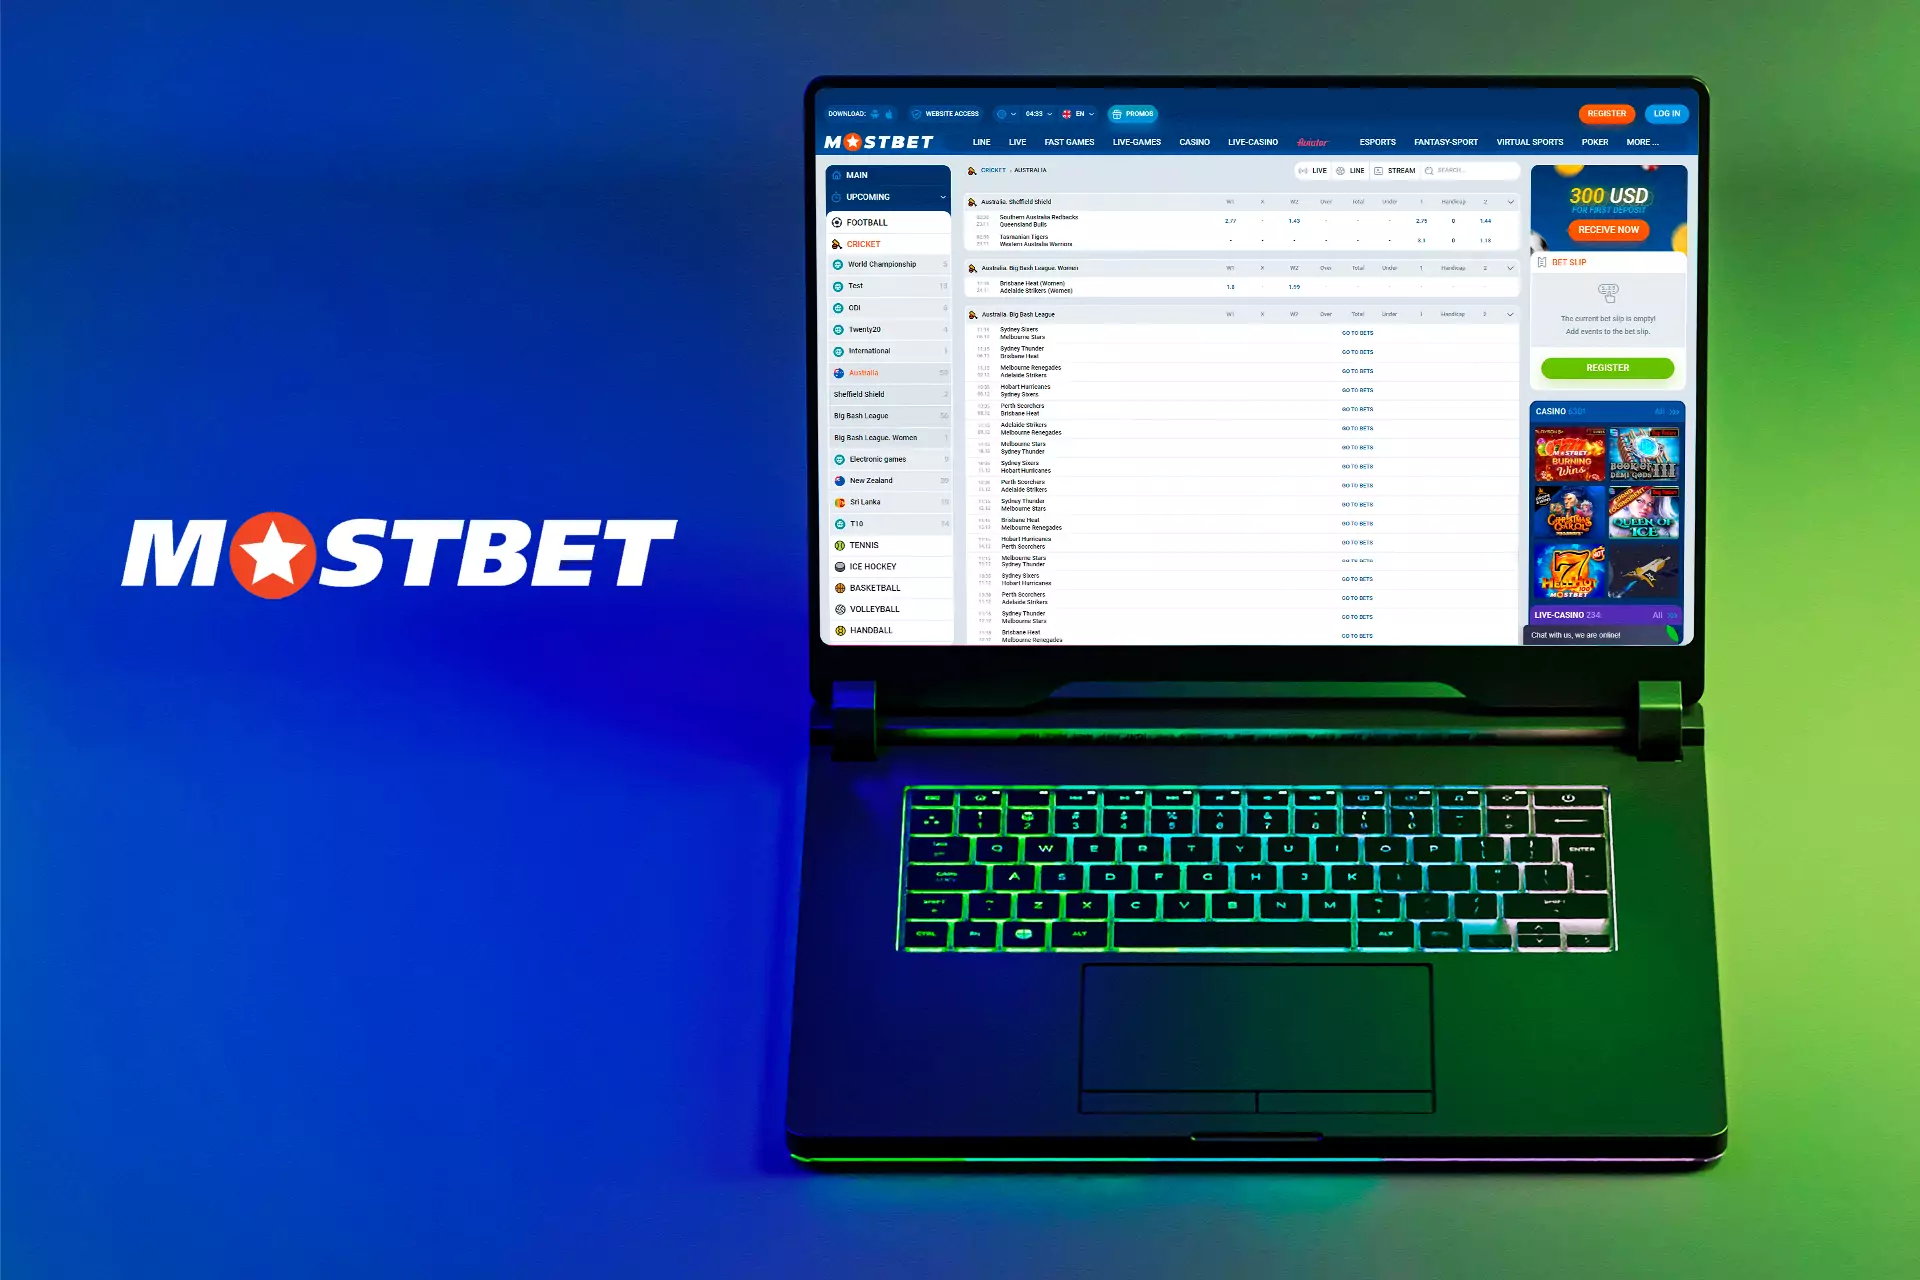 Mostbet works under the Curacao gaming license and is one of the largest bookmakers in the Australian market.